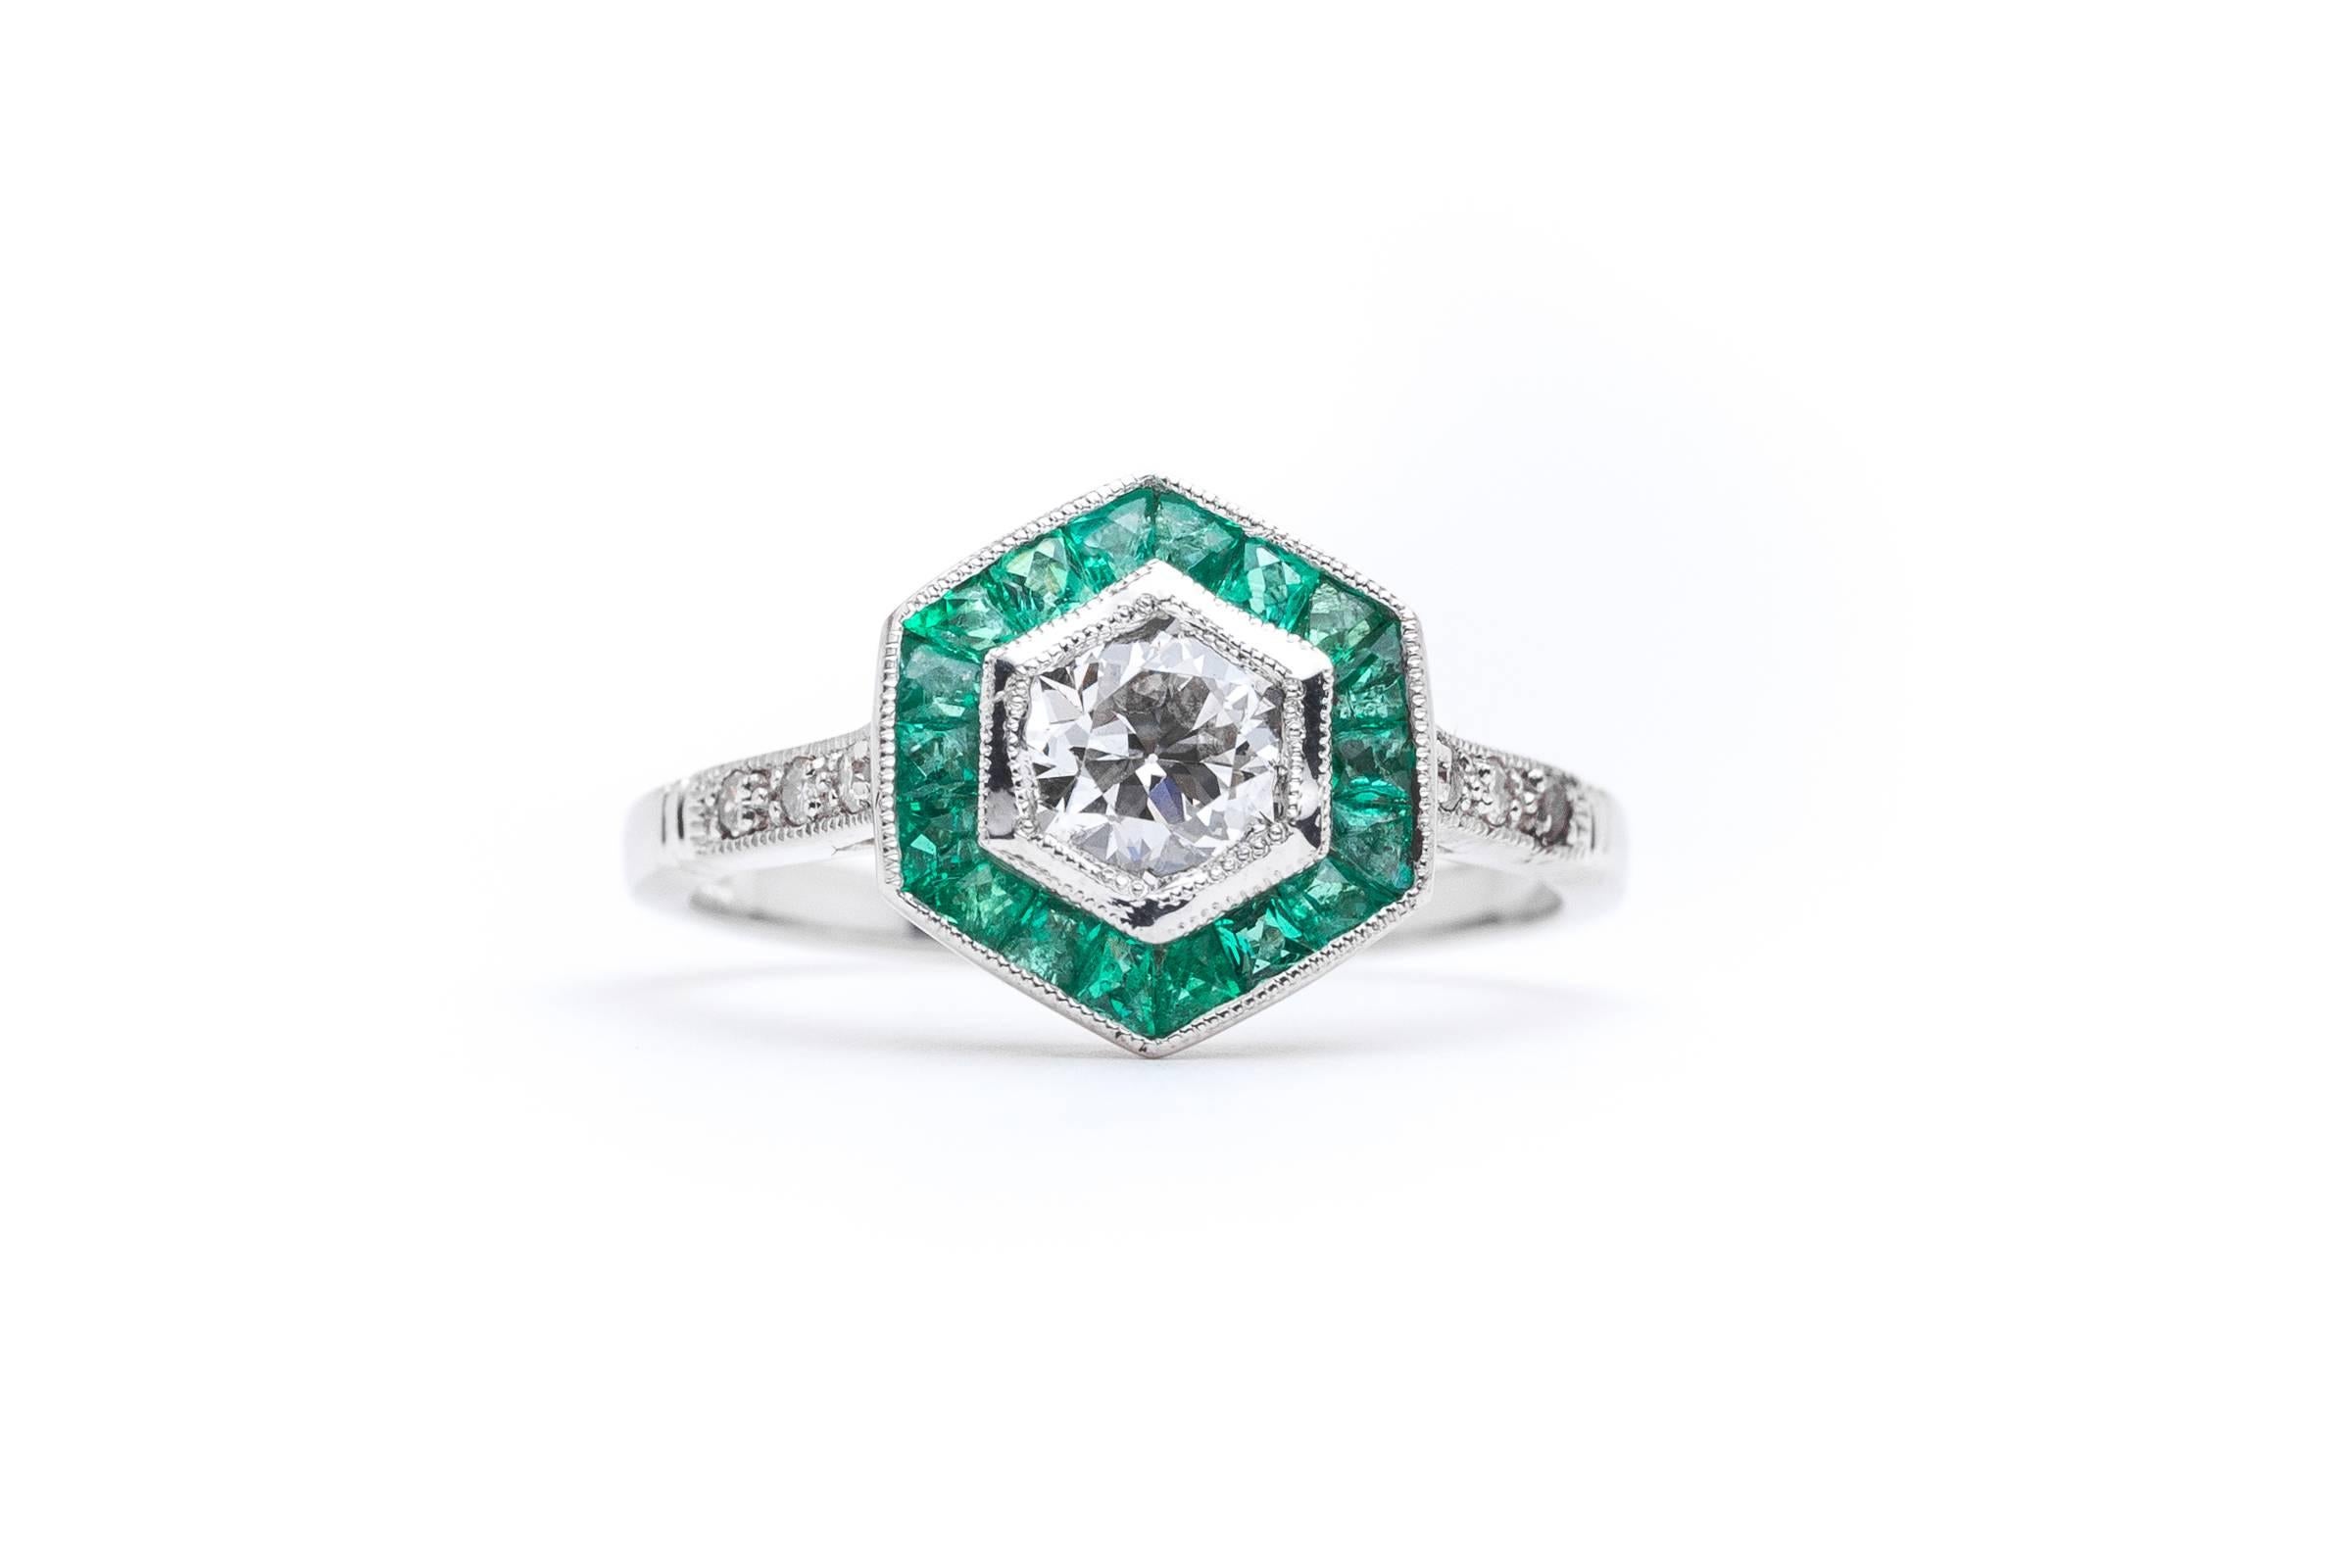 Beacon Hill Jewelers Presents:

A stunning art deco period inspired diamond and emerald ring in platinum. Centered by a 0.73 carat old European cut diamond this six sided ring features beautiful French cut emeralds surrounding the center diamond in